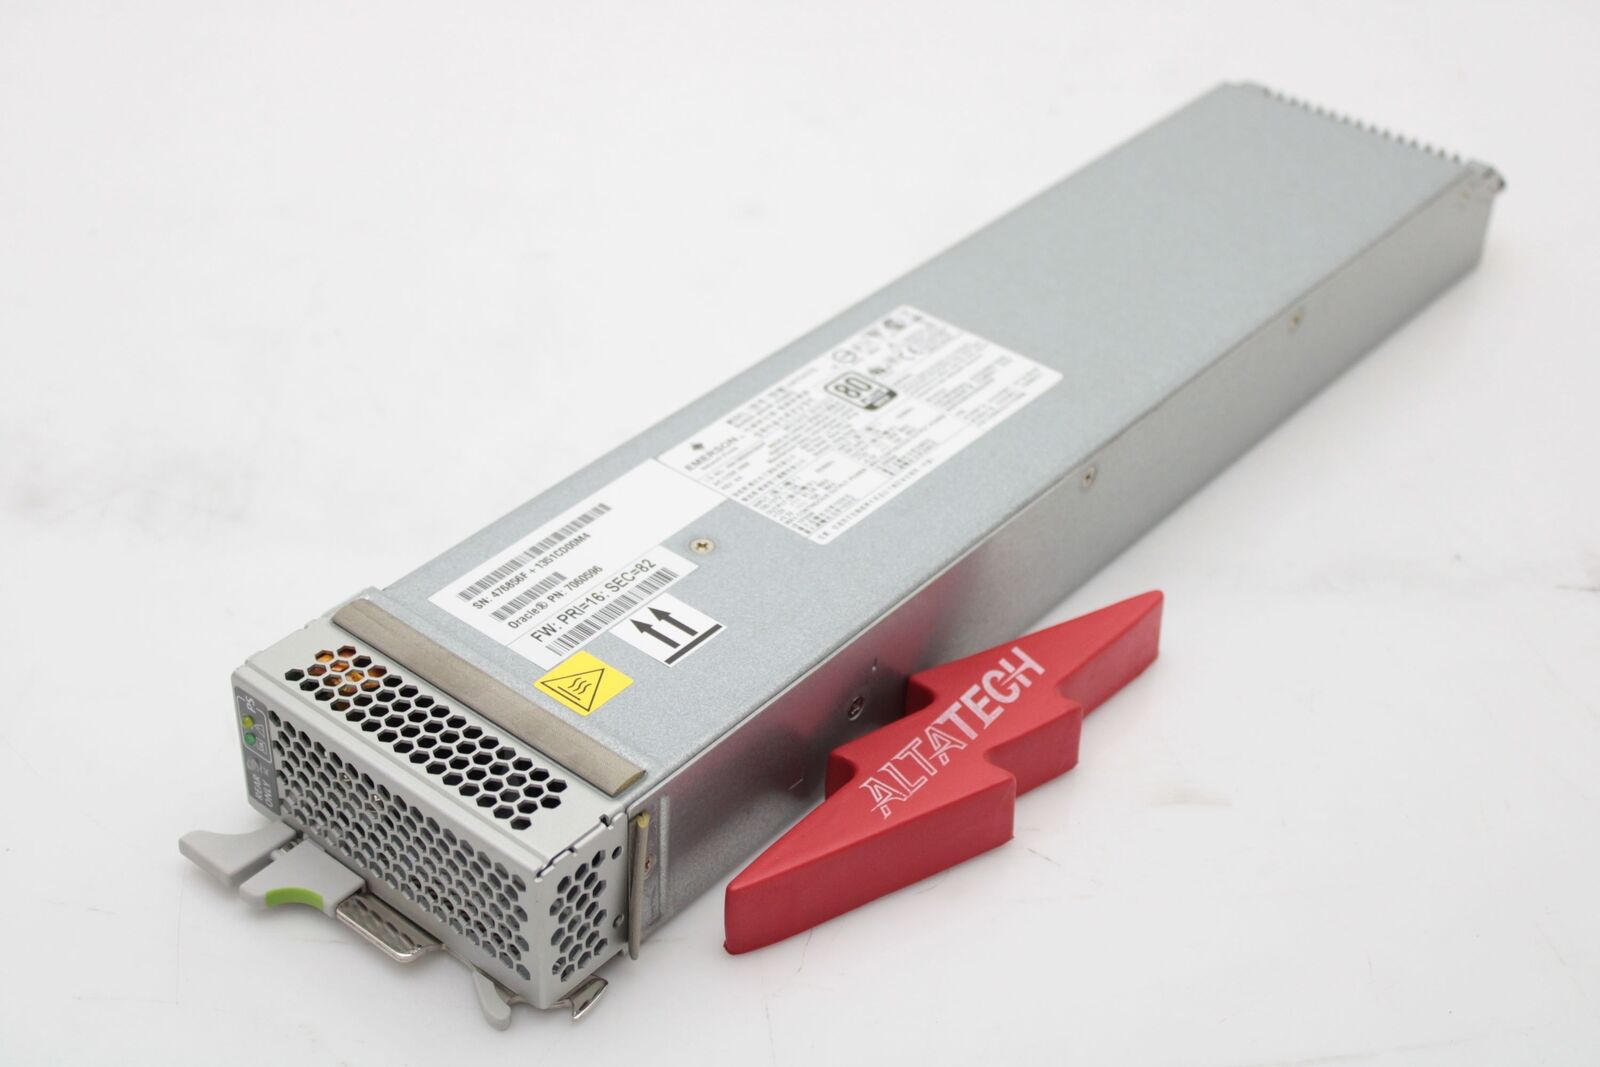 Sun Oracle 7060596 SPARC T5-2 2000W AC Power Supply Unit PSU - Fully Tested